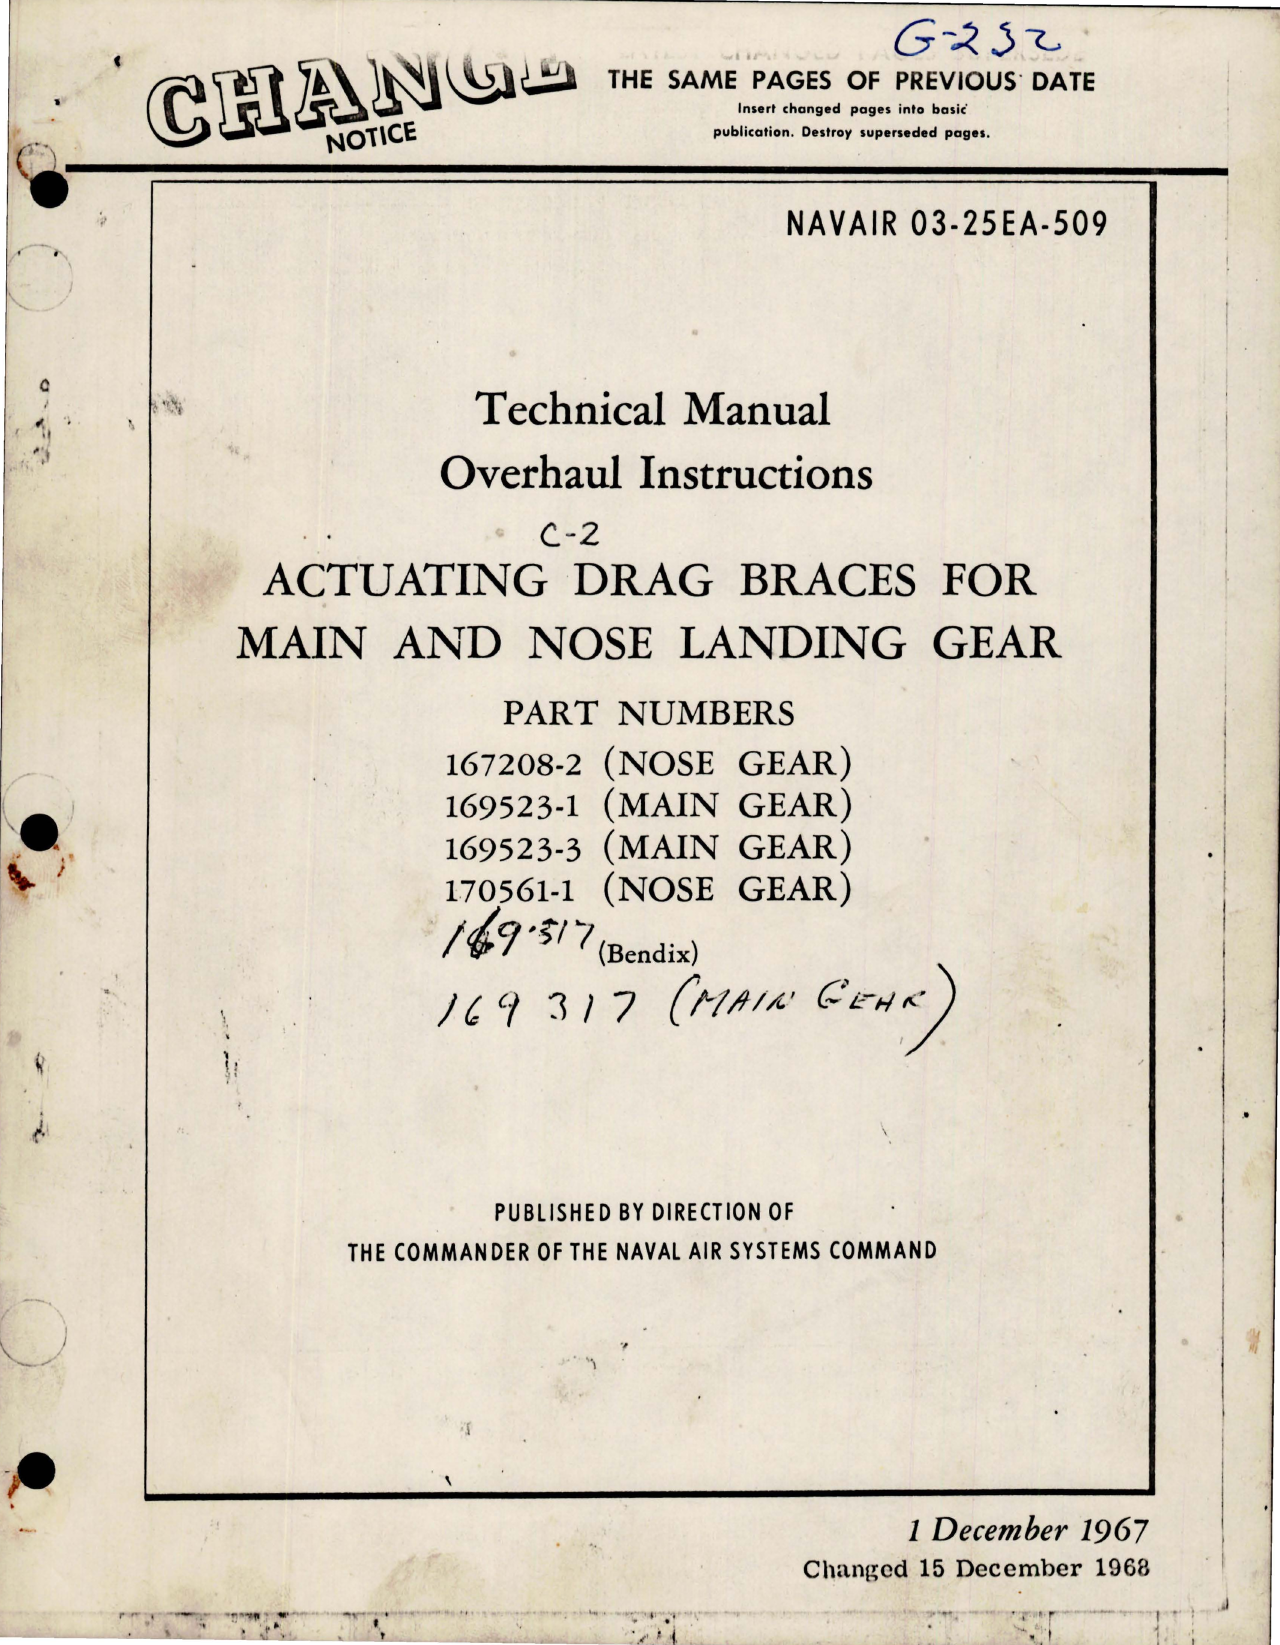 Sample page 1 from AirCorps Library document: Overhaul Instructions for Actuating Drag Braces for Main and Nose Landing Gear 